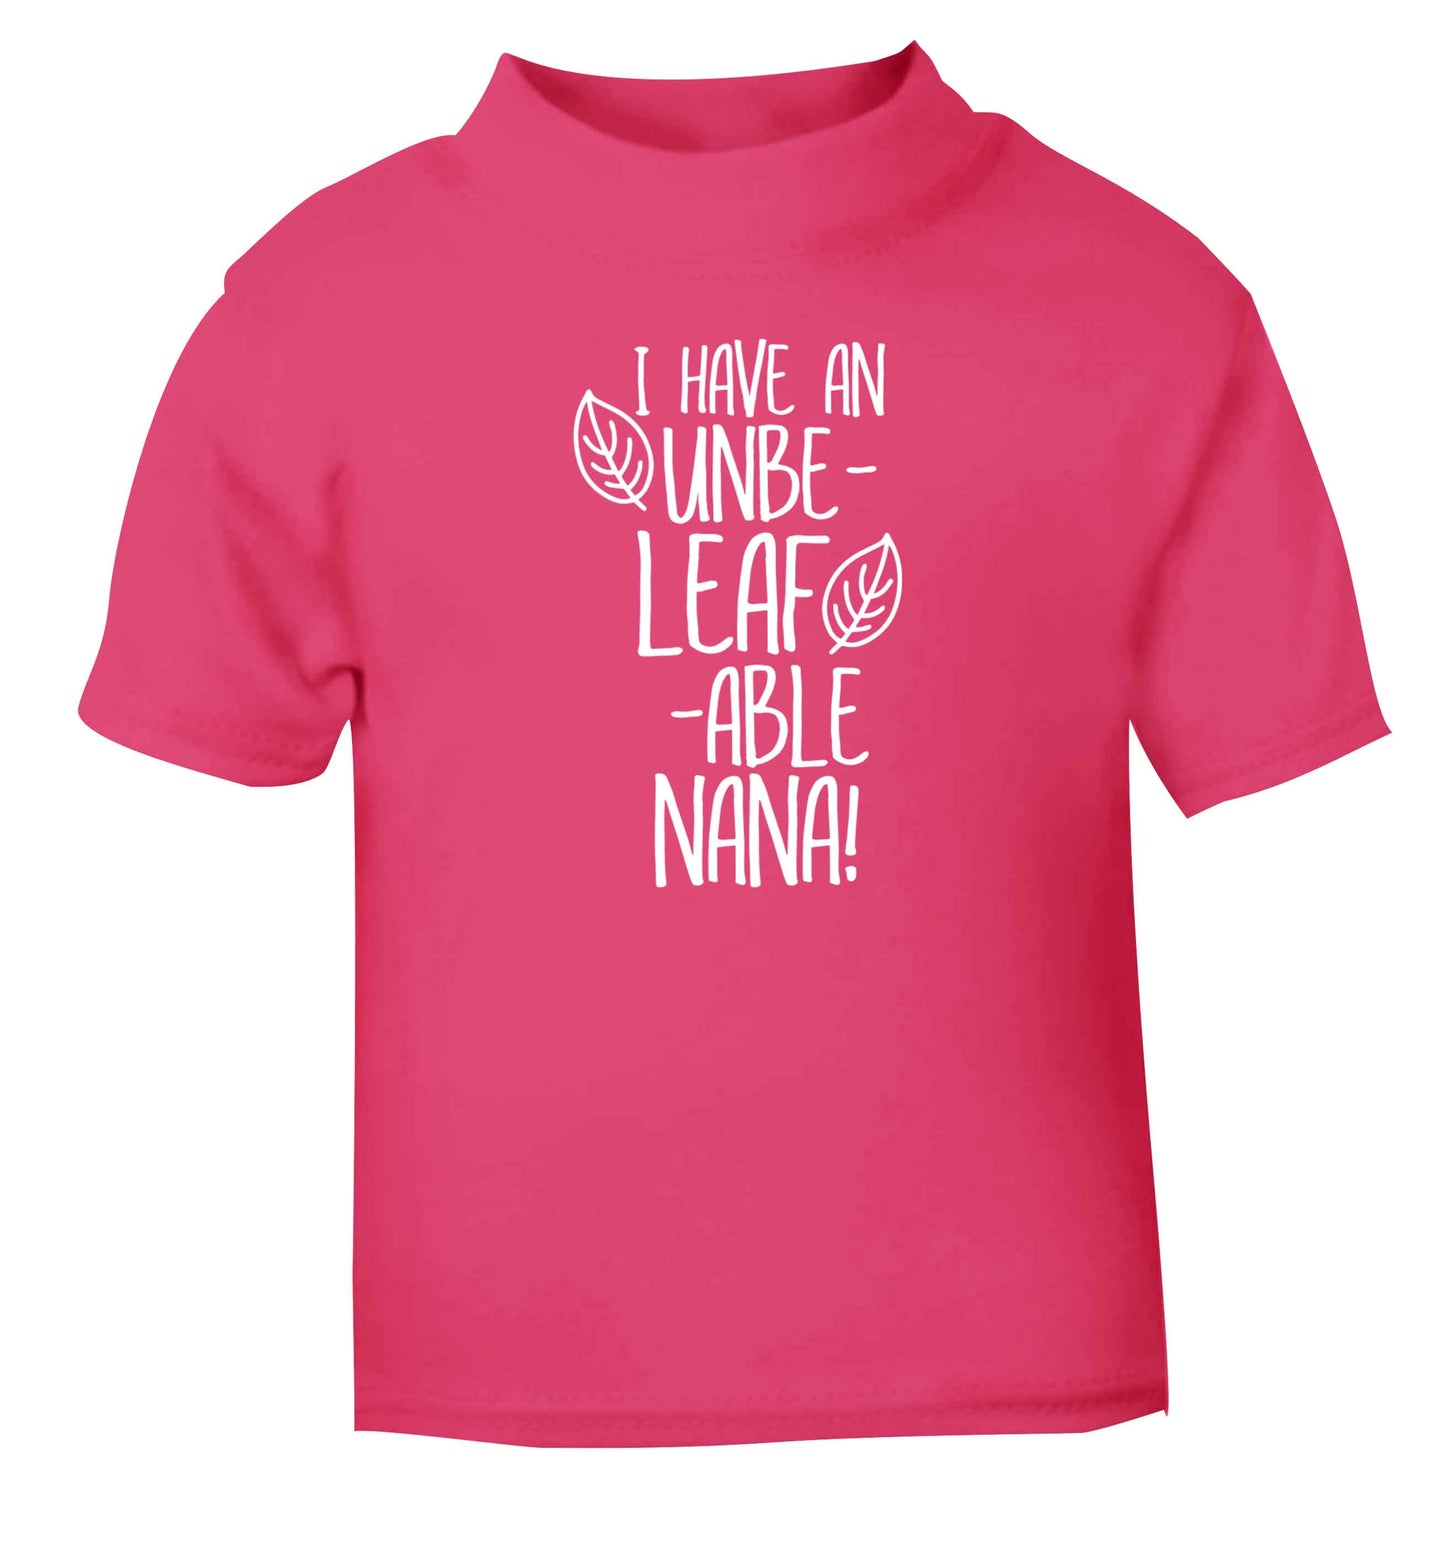 I have an unbe-leaf-able nana pink Baby Toddler Tshirt 2 Years